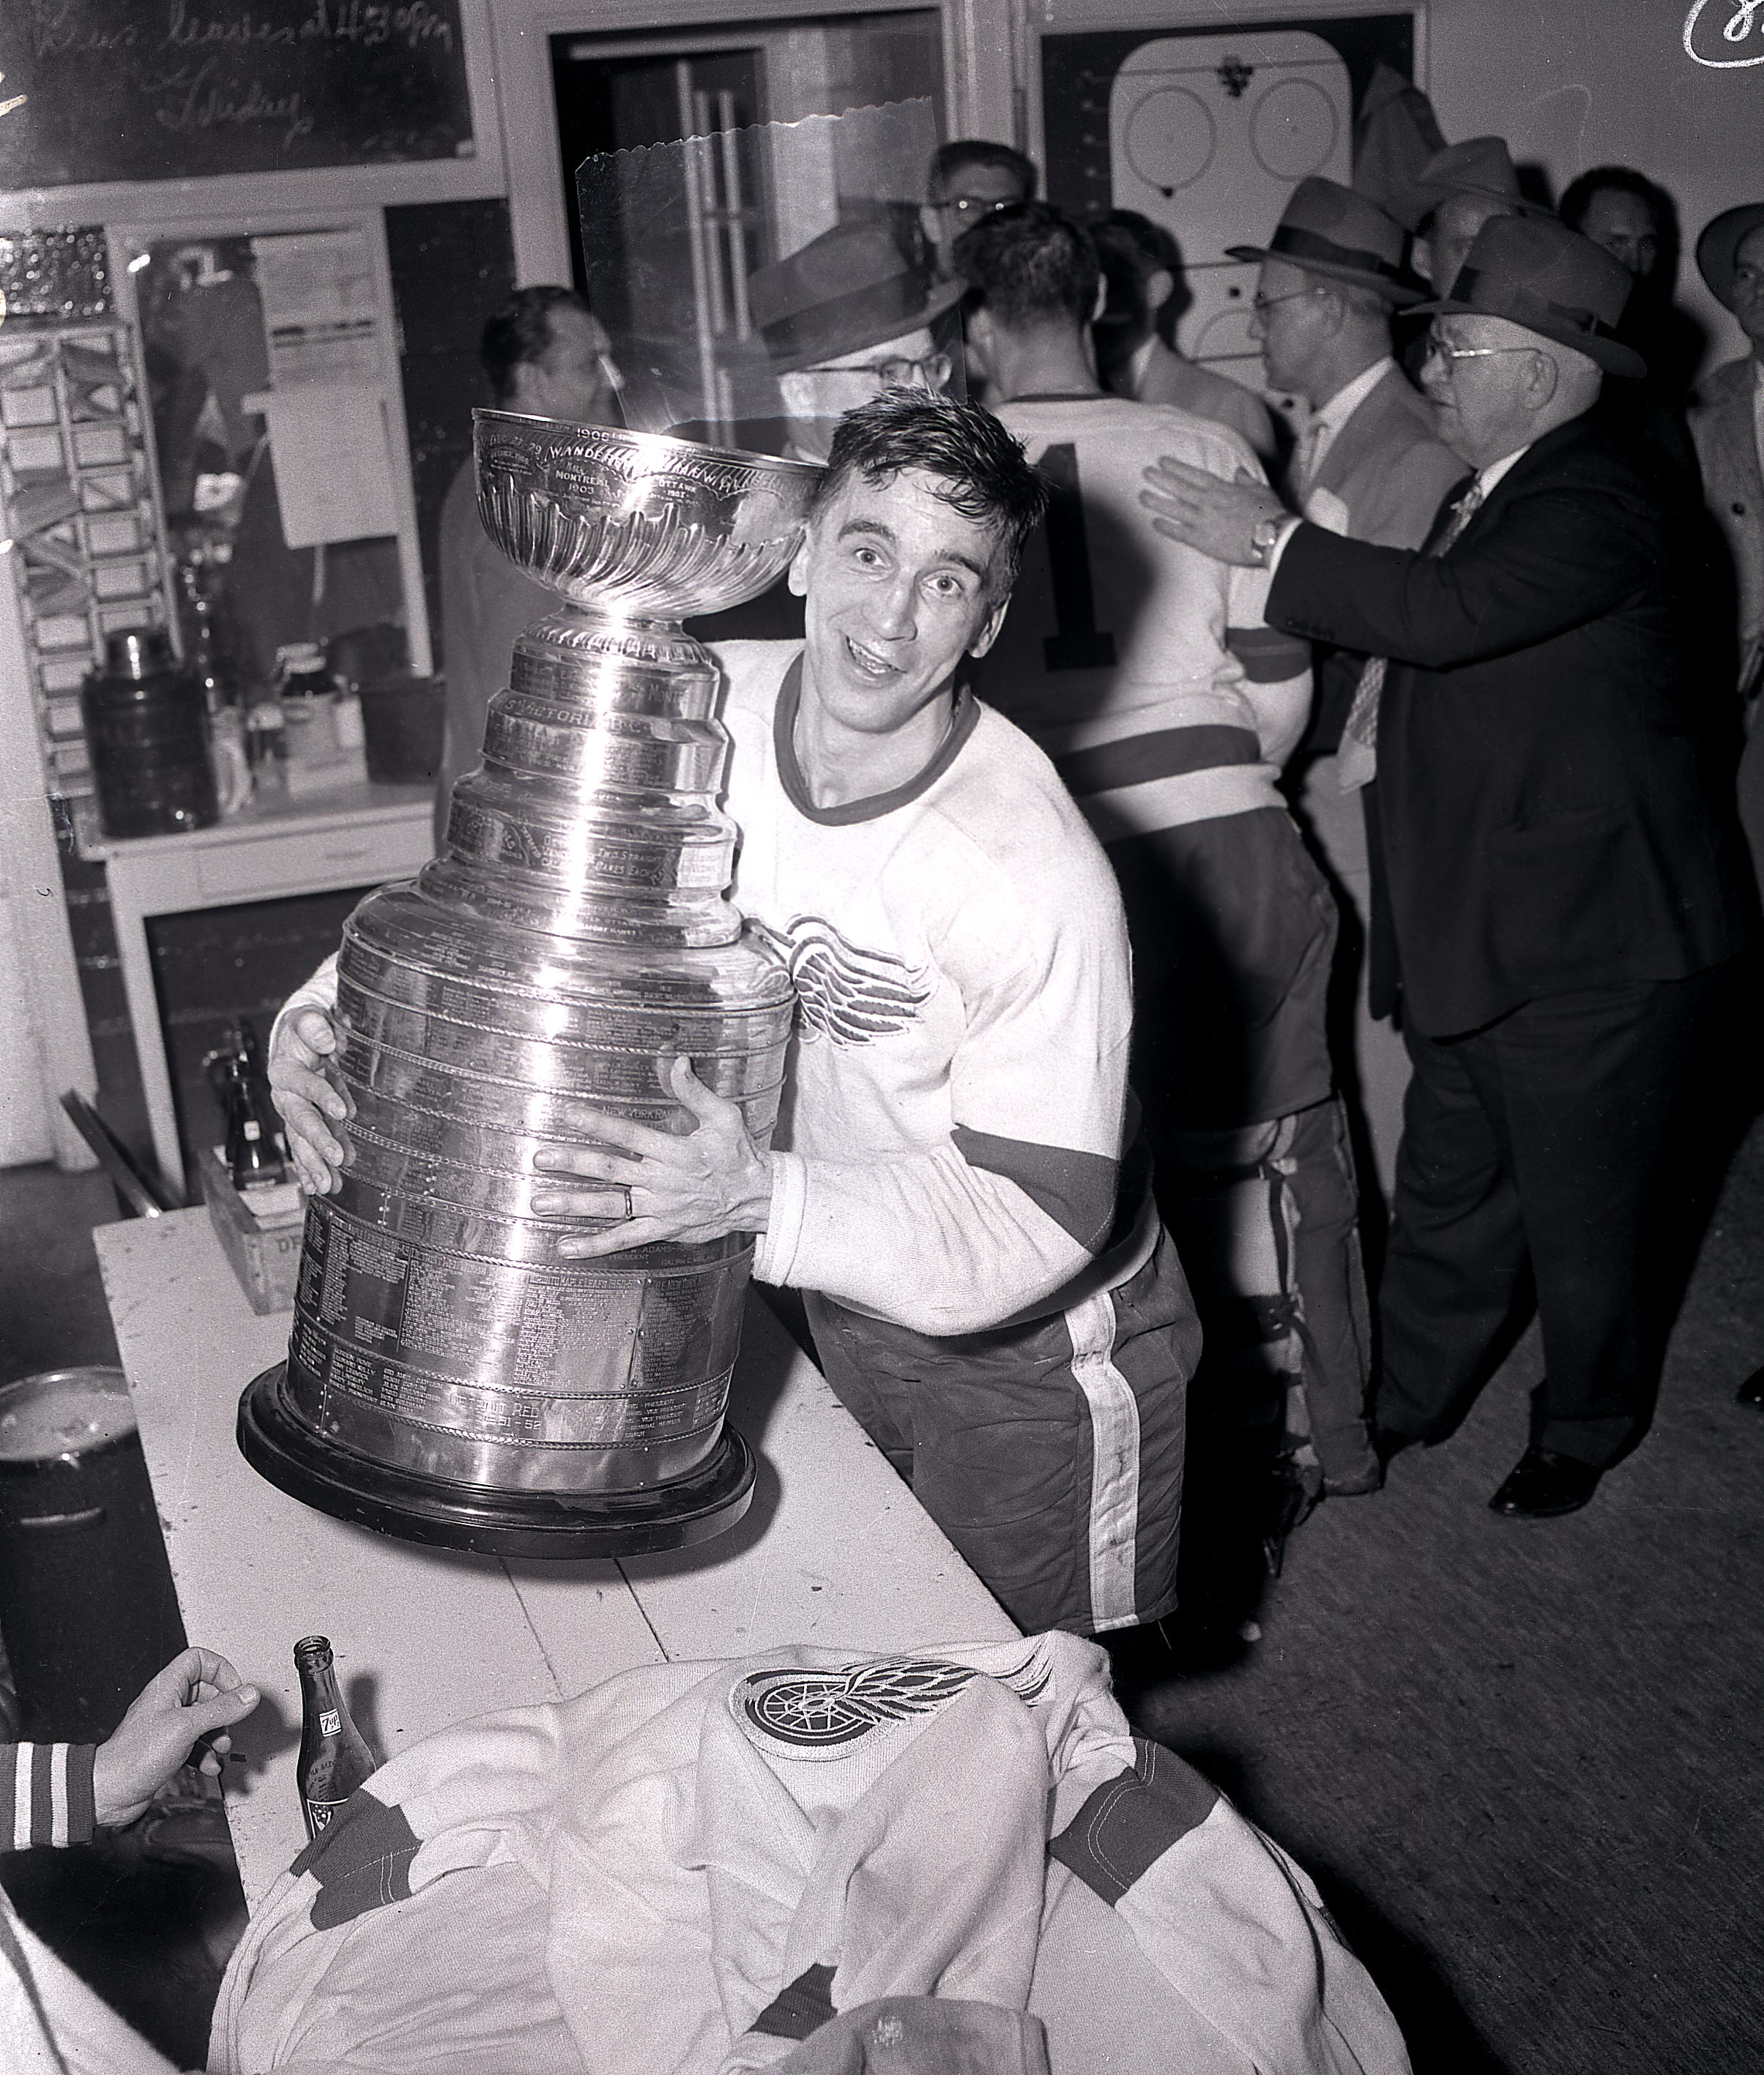 Ted Lindsay's Red Wings won the Stanley Cup in 1950, 1952, 1954 and 1955. Lindsay was the first player to lift the Stanley Cup and skate it around the rink, starting the tradition.[